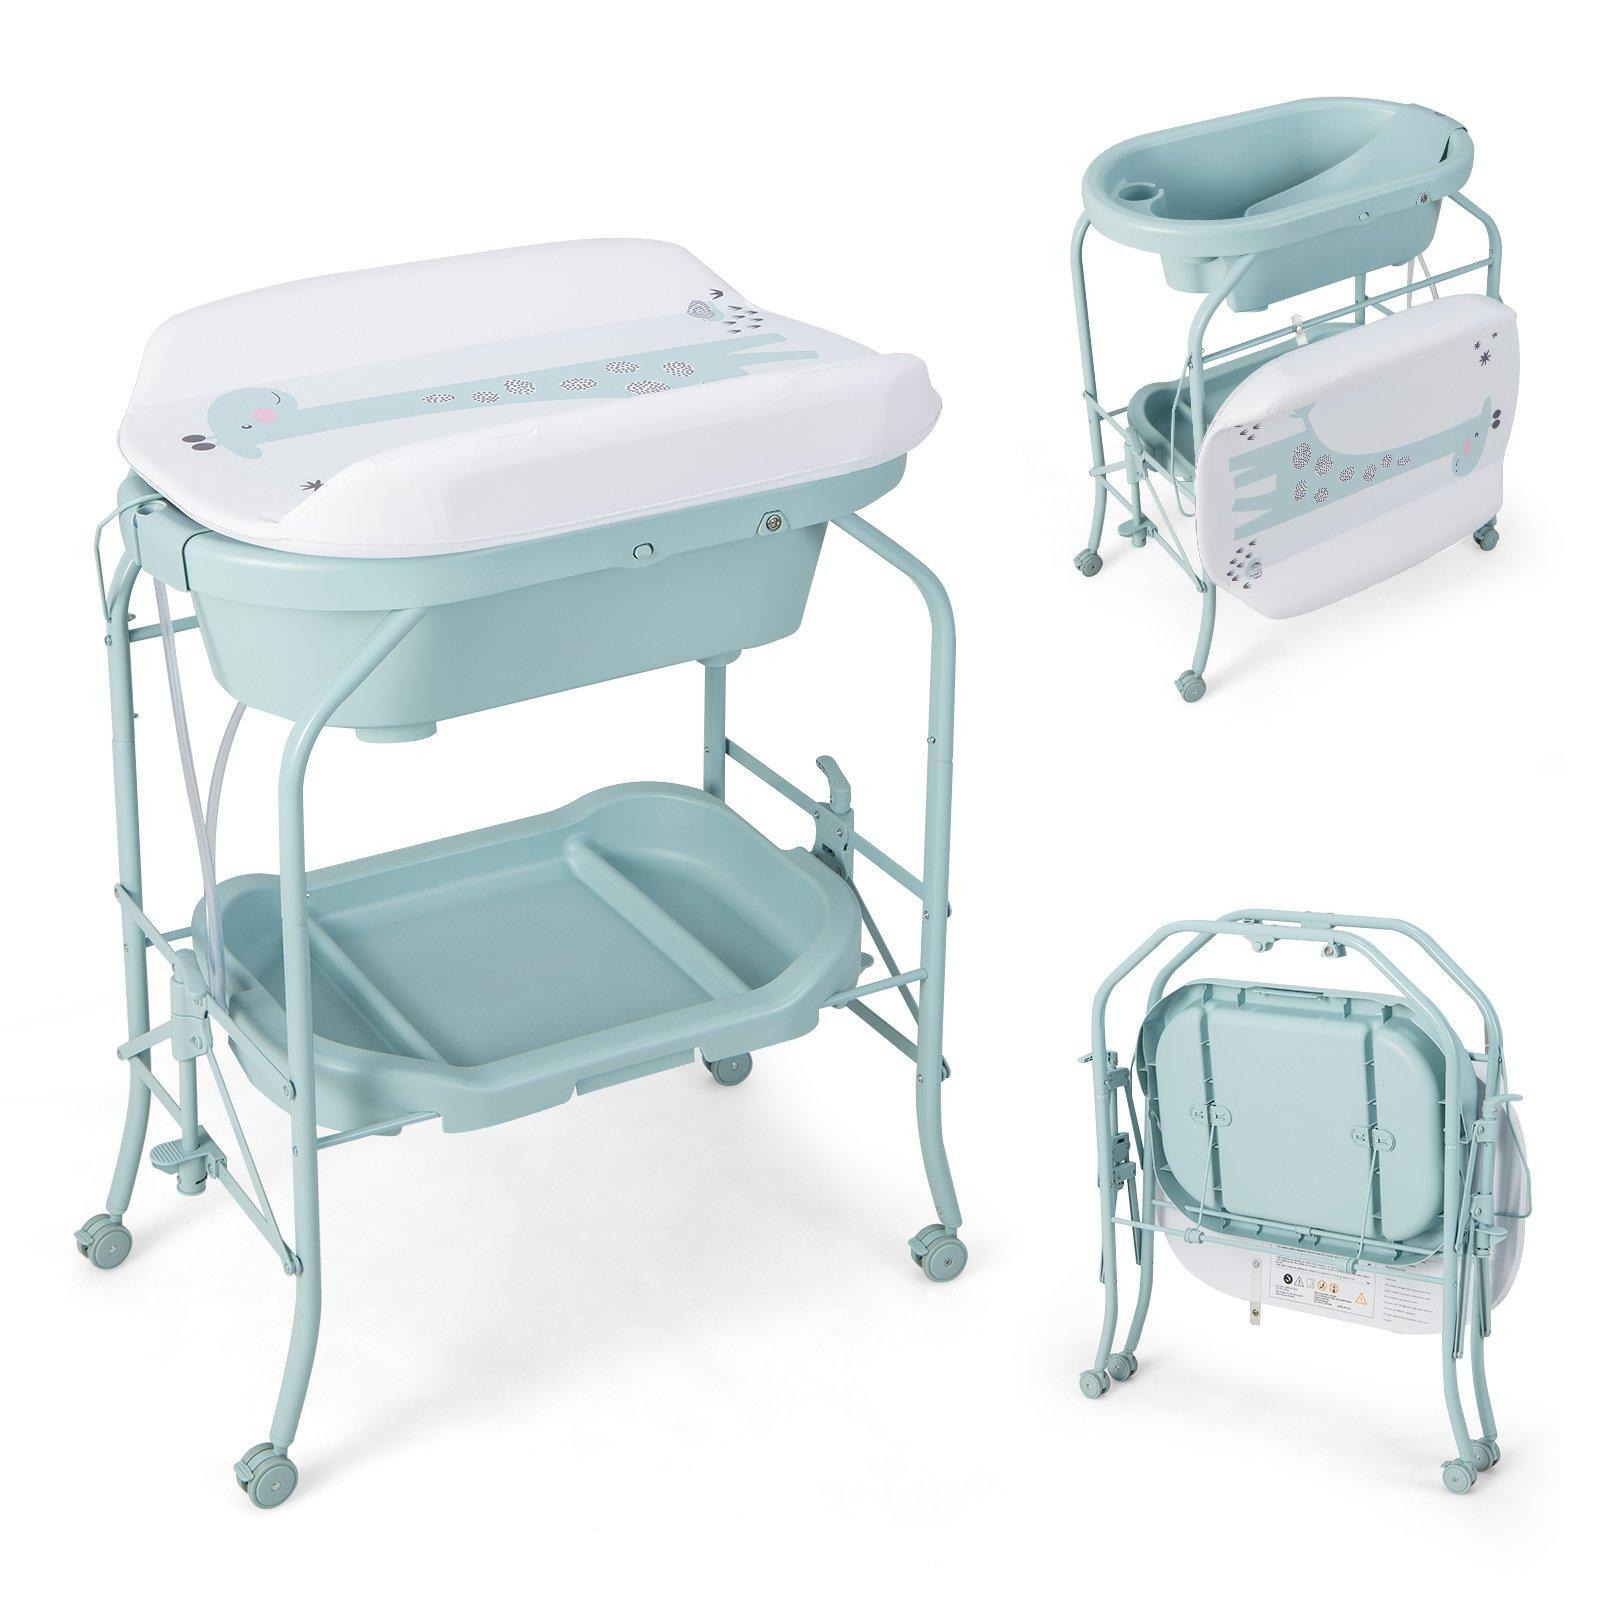 Baby Changing Table with Bathtub Folding Infant Diaper Changing Nursery Station - image 1